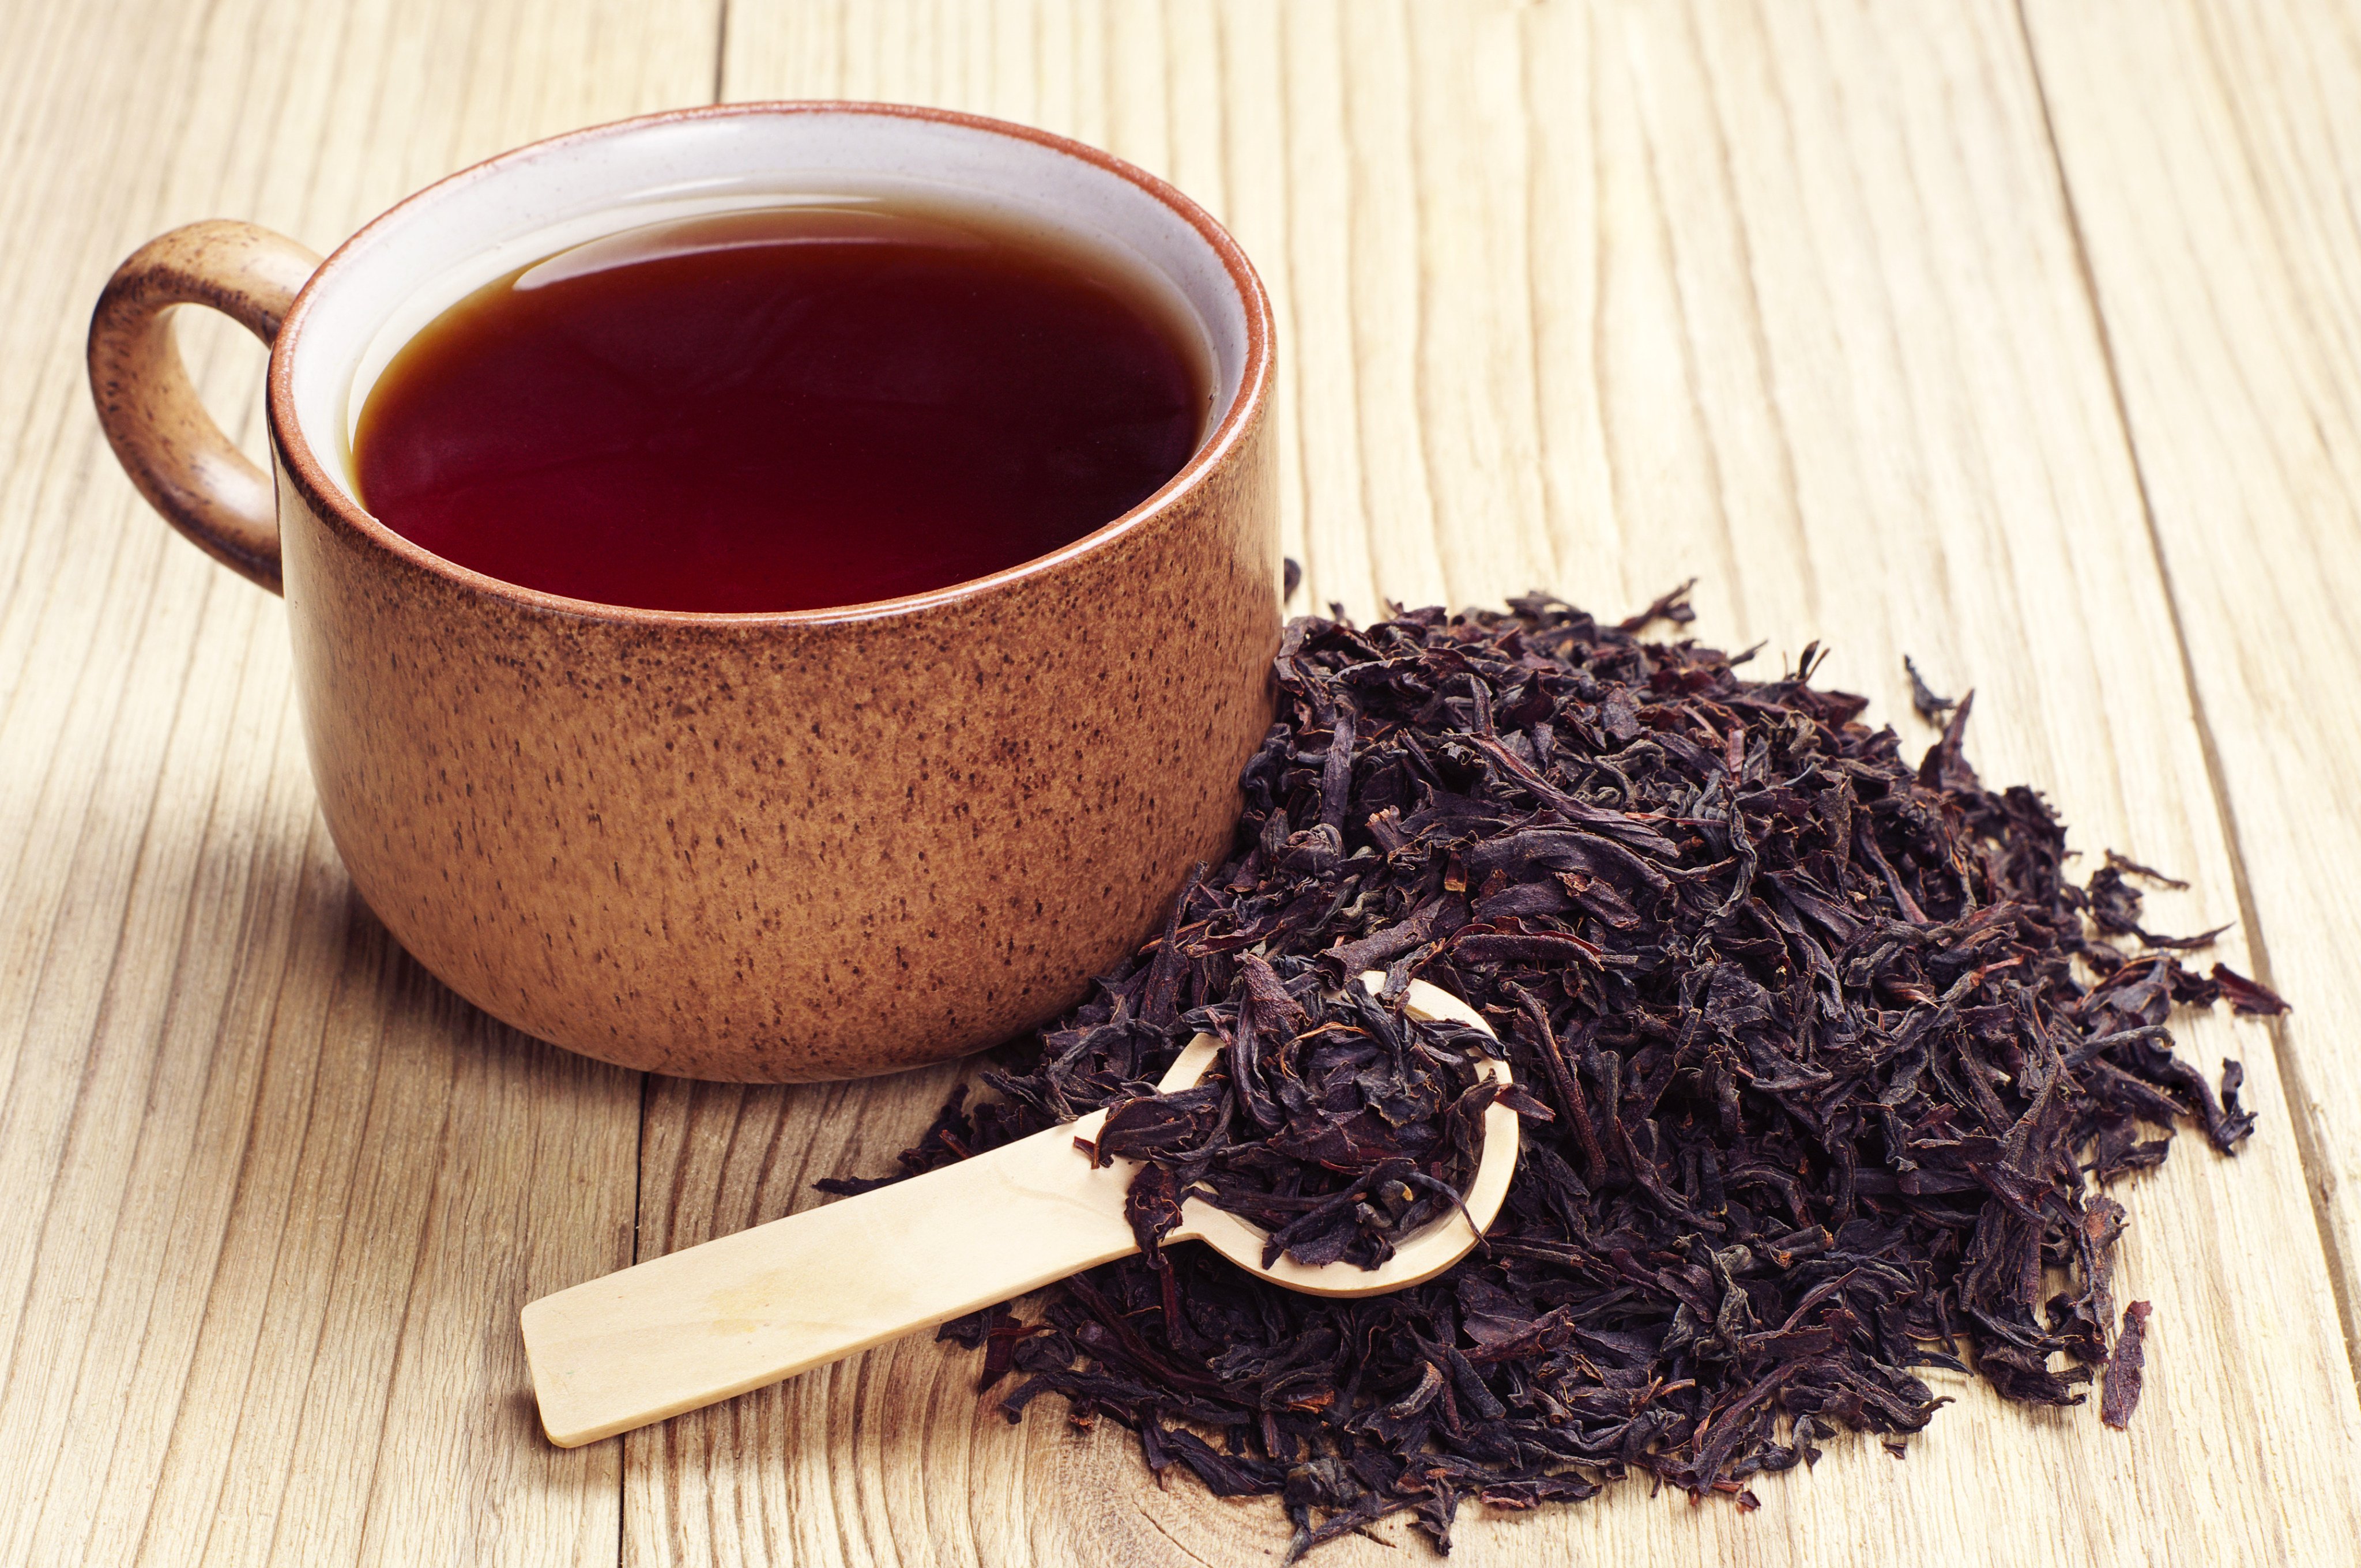 Cash strapped Sri Lanka paid a portion of its oil debt to Iran with tea. Photo: Shutterstock